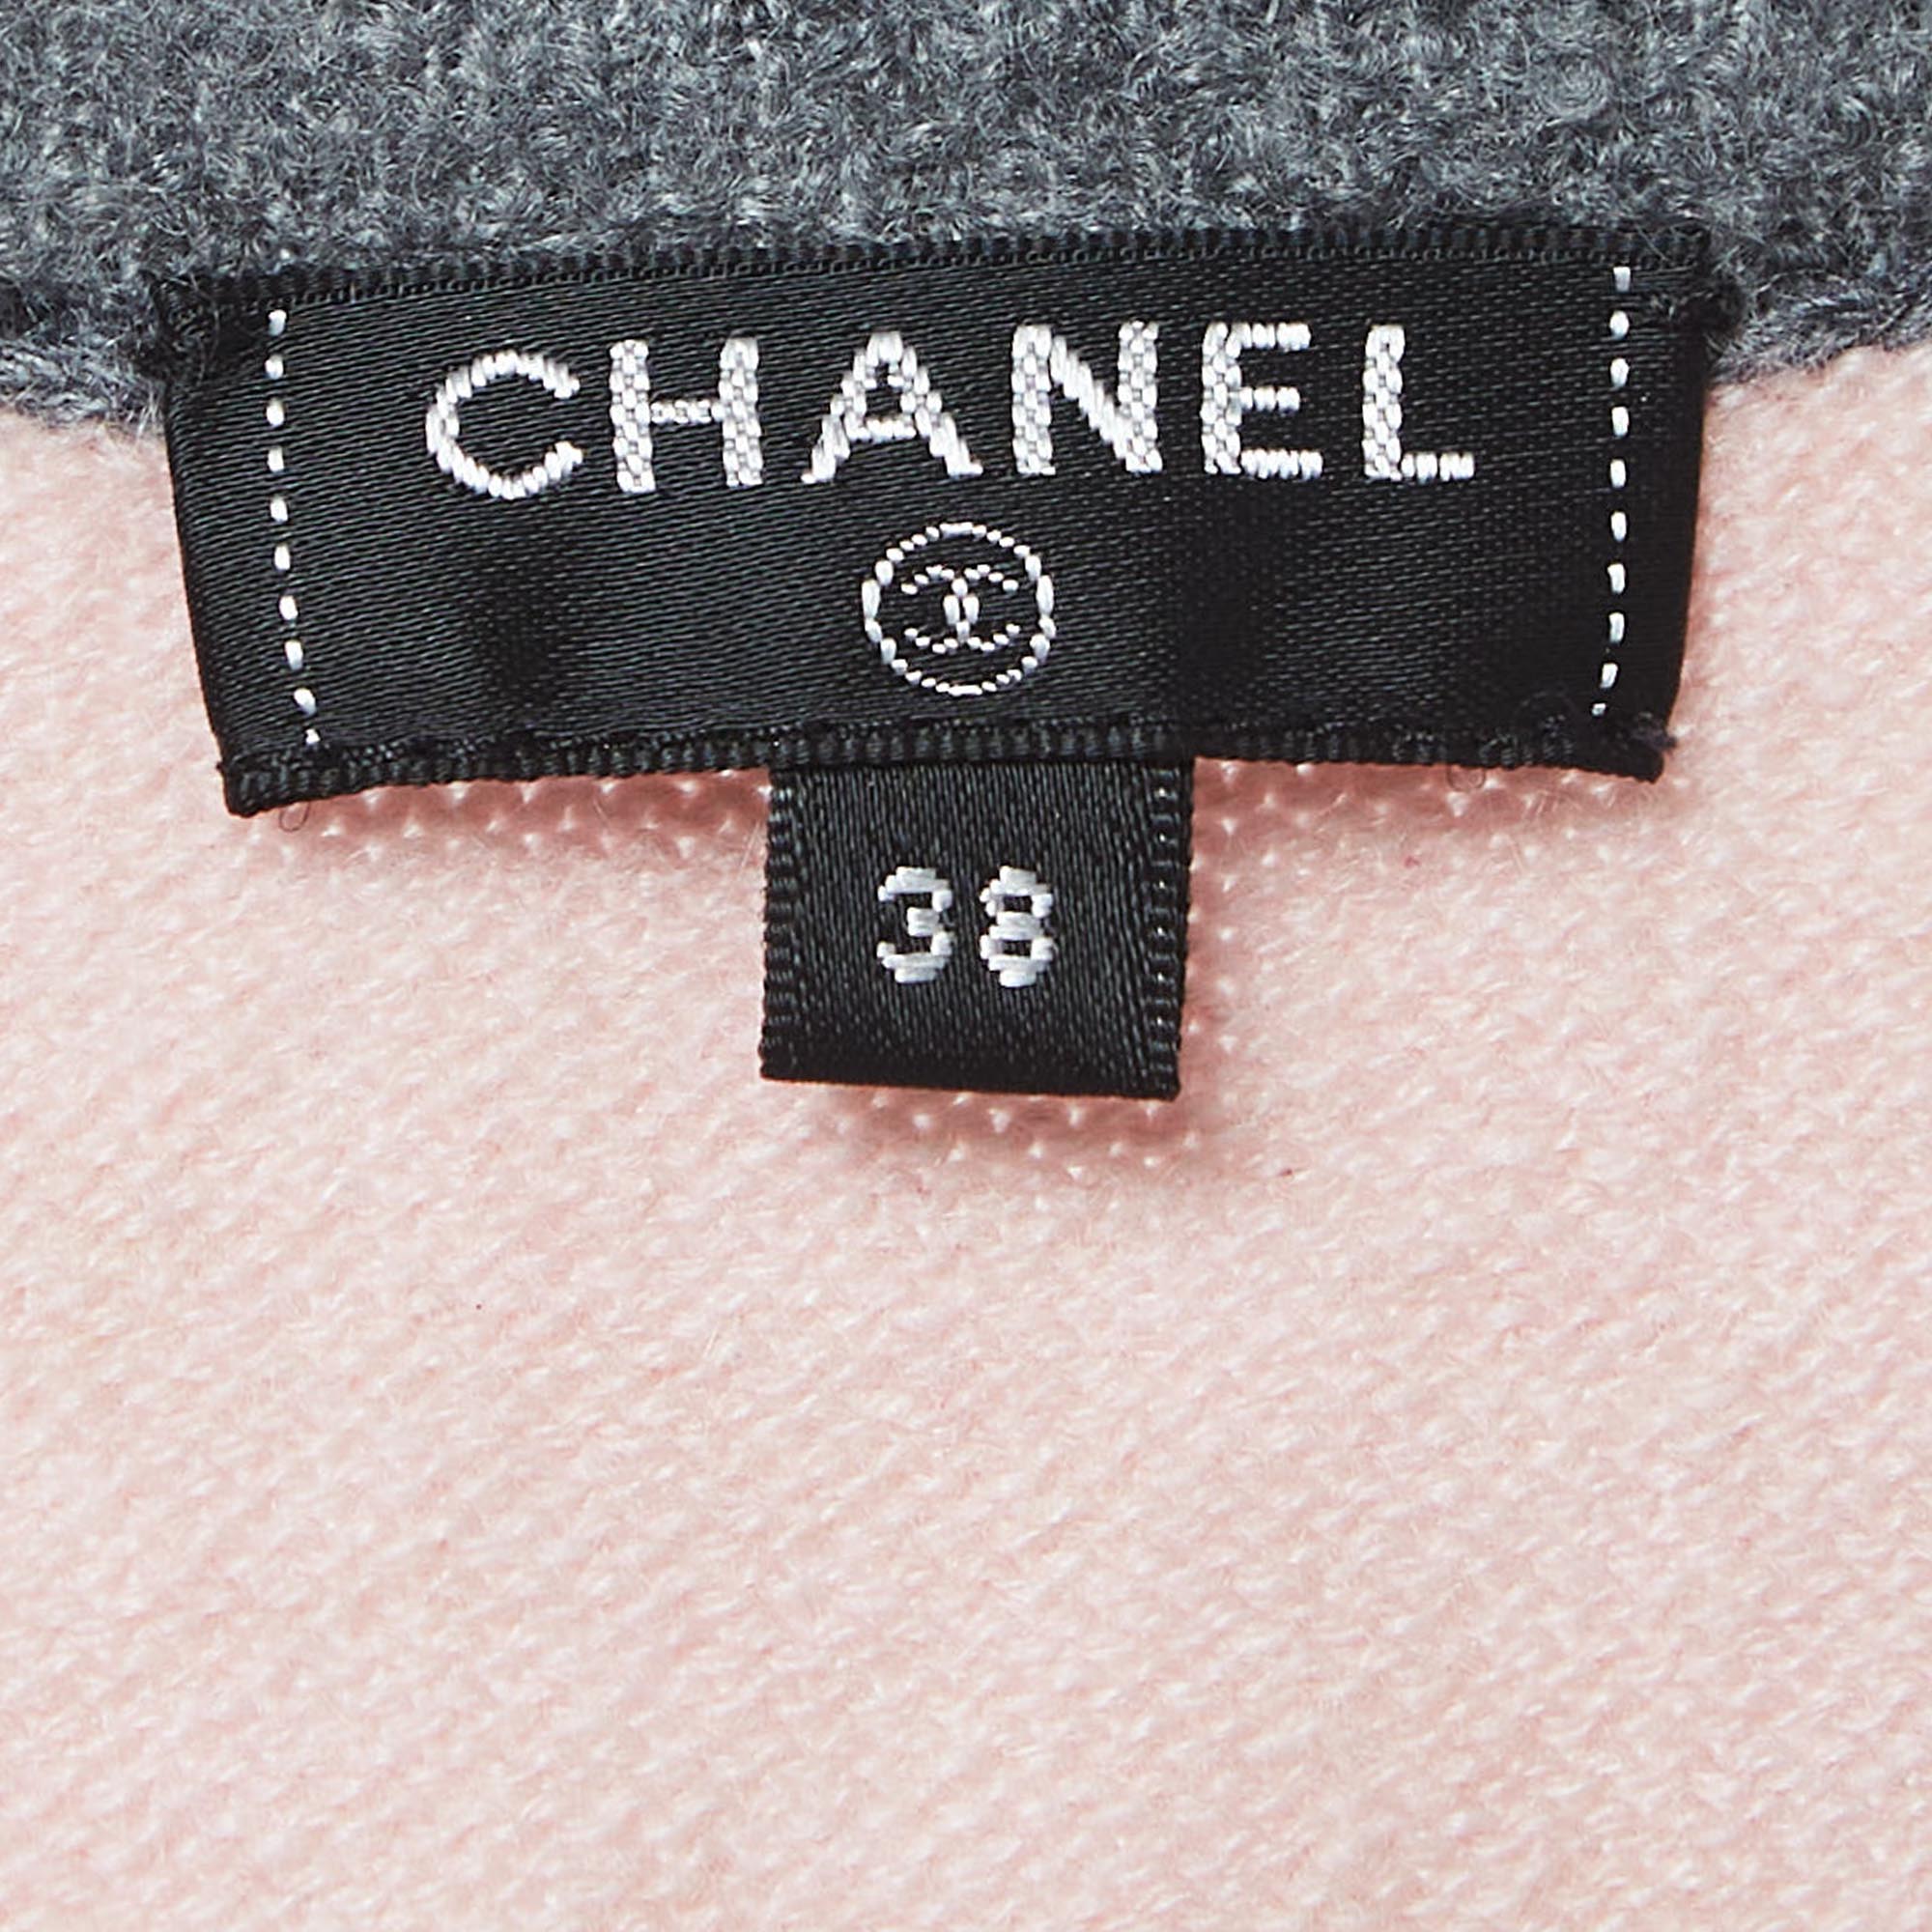 Chanel Pink Cashmere Buttoned Sweater Vest M